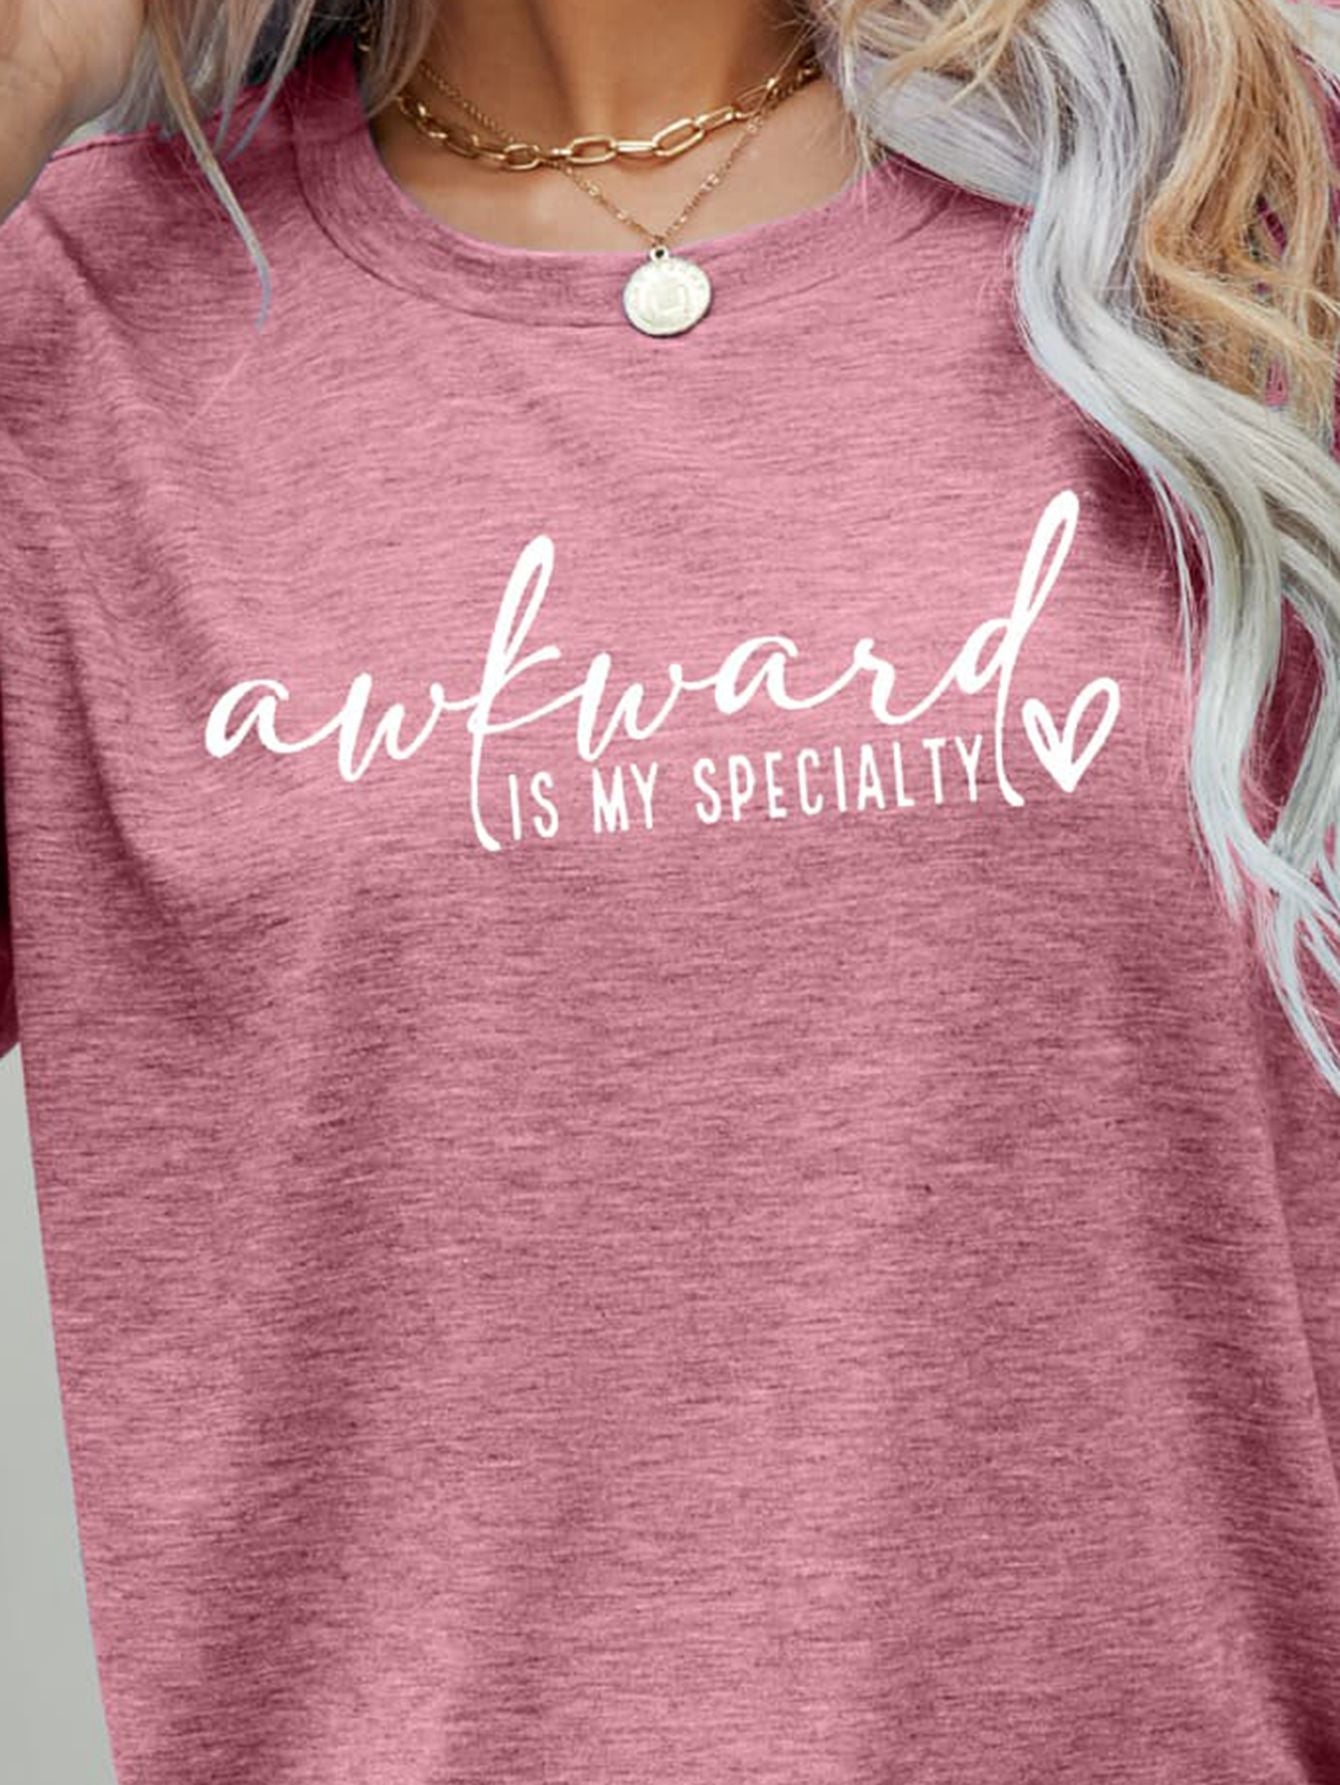 AWKWARD IS MY SPECIALTY Graphic Tee - T-Shirts - Shirts & Tops - 15 - 2024